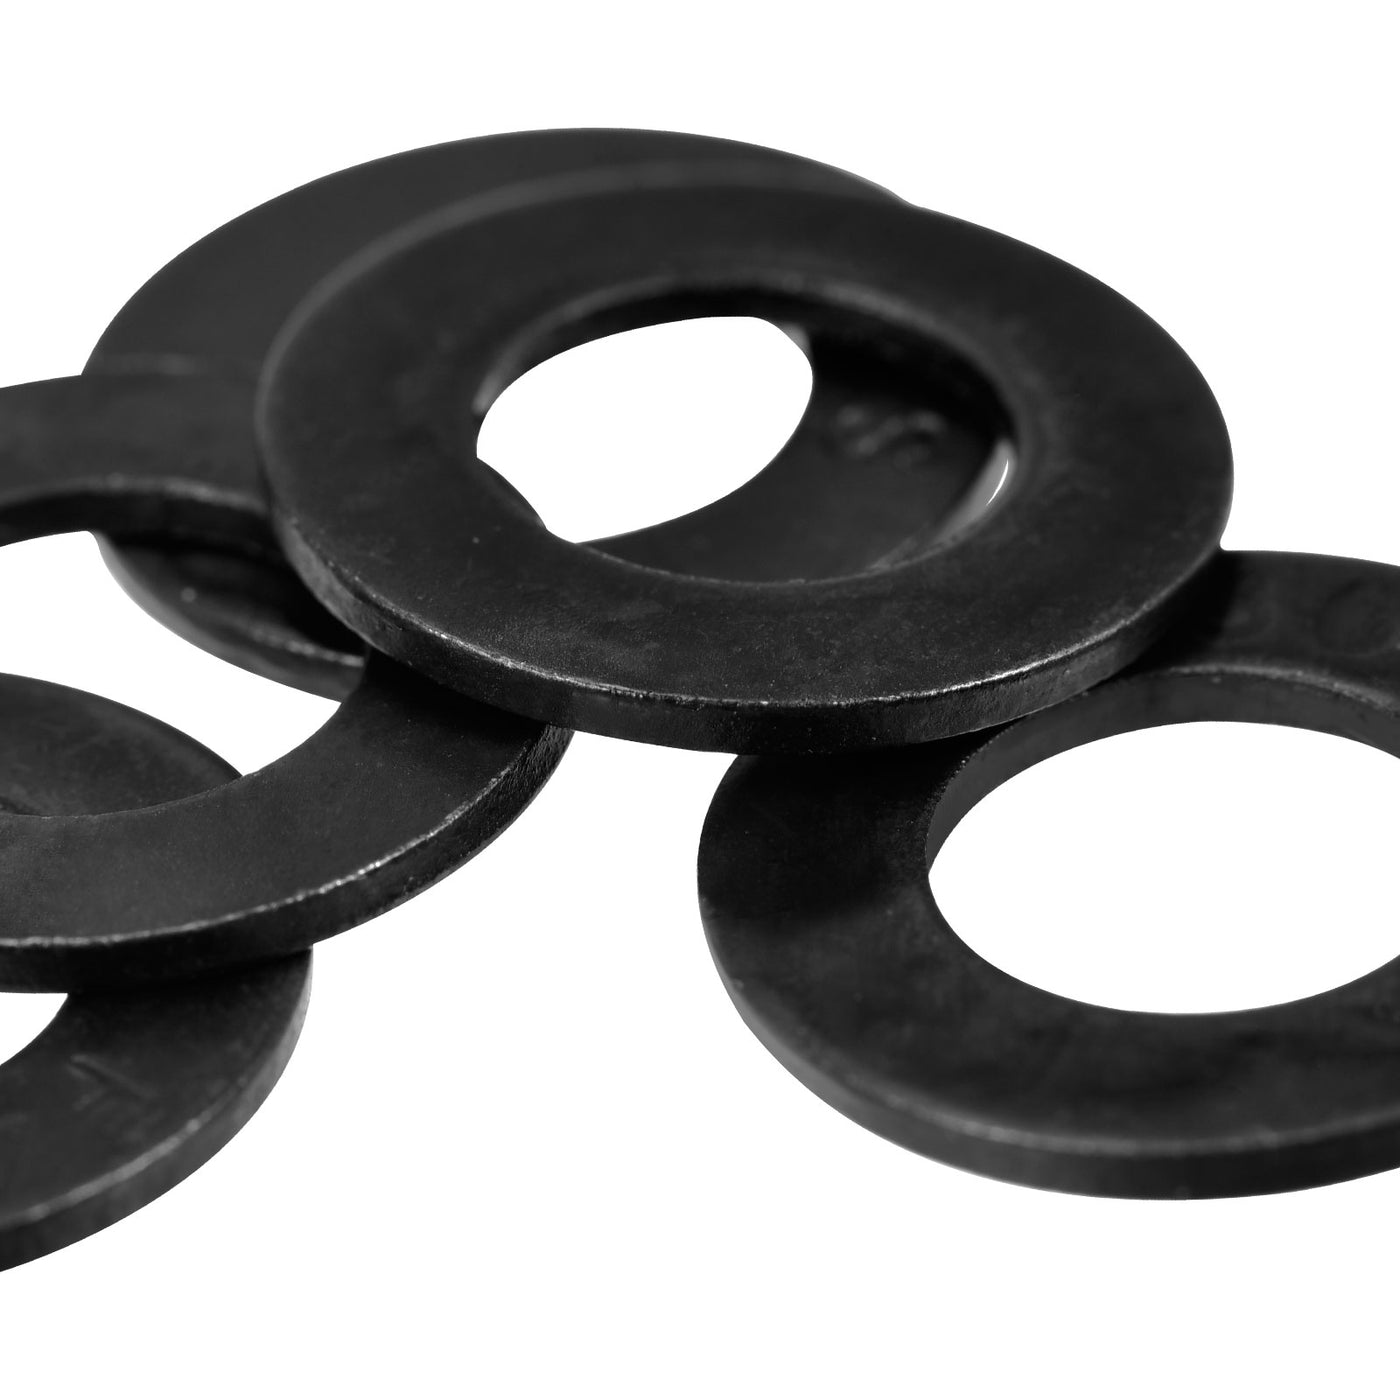 uxcell Uxcell 1/2-Inch Flat Washer, Alloy Steel Black Oxide Finish Pack of 25